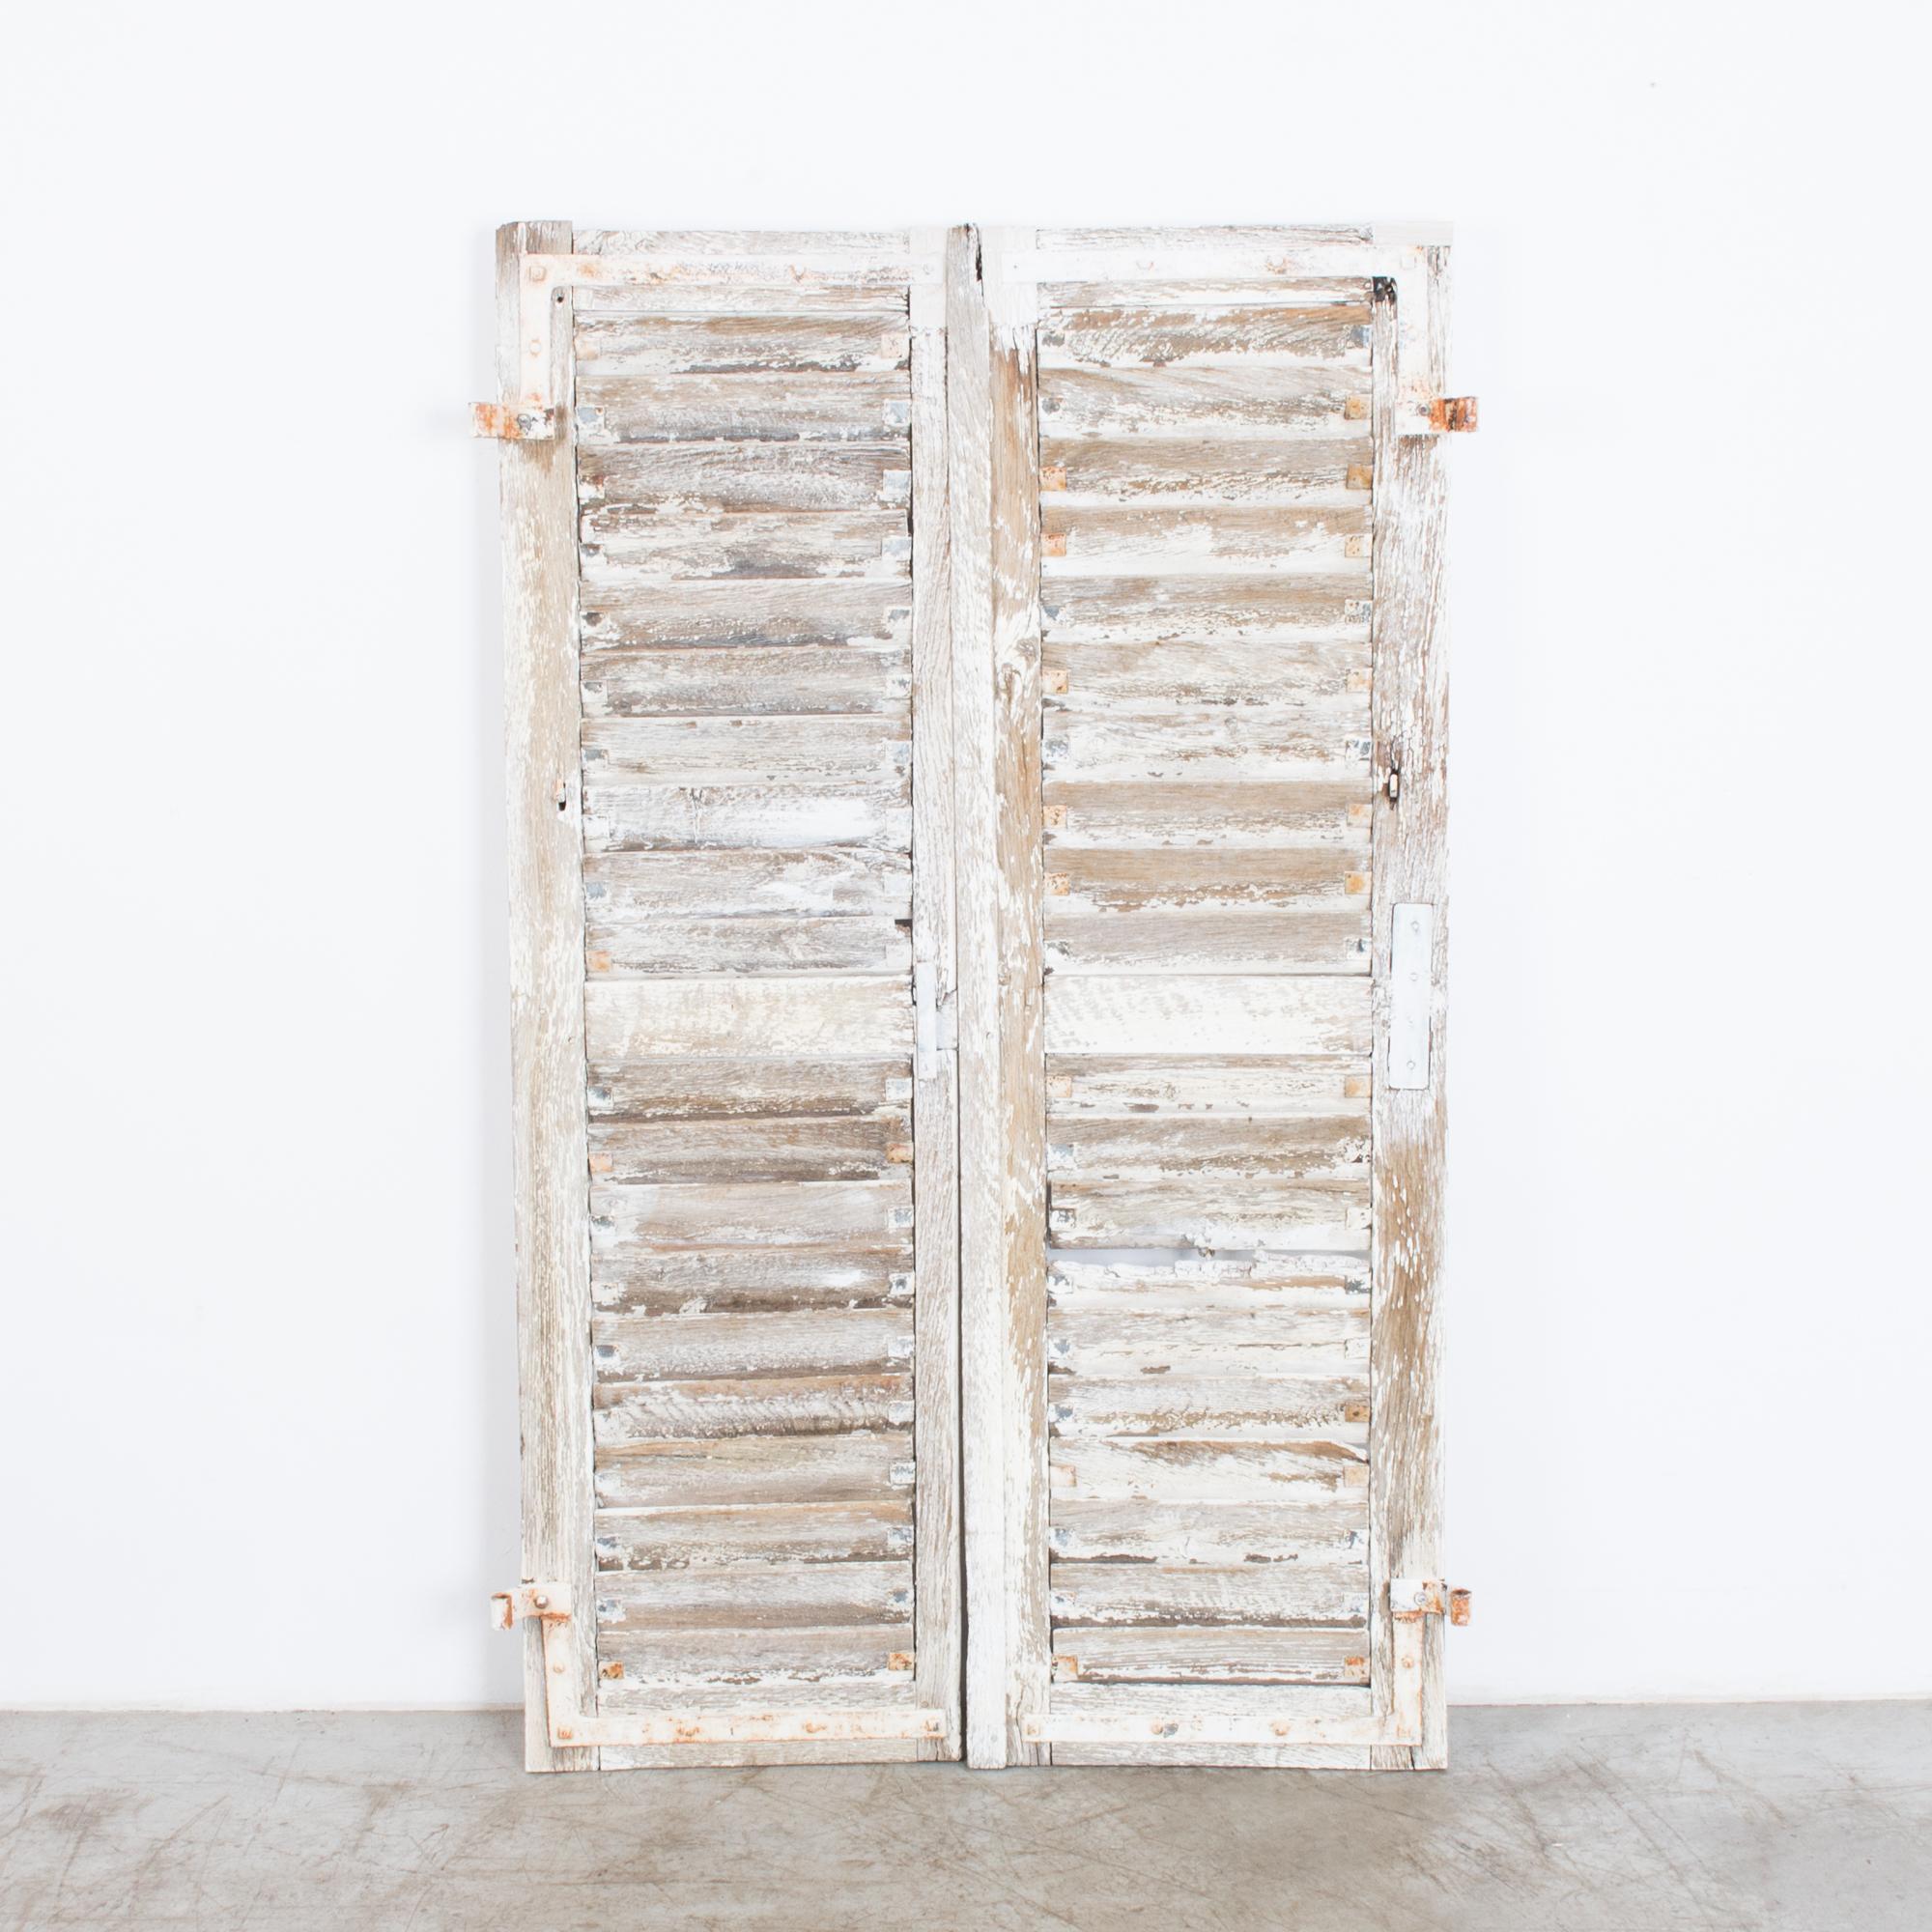 A protective cover from the breezy French countryside. For a space craving character, these charming shutters are layered with worn white paint, creating a beautiful encrusted patina. High contrast textures match with honest material a striking